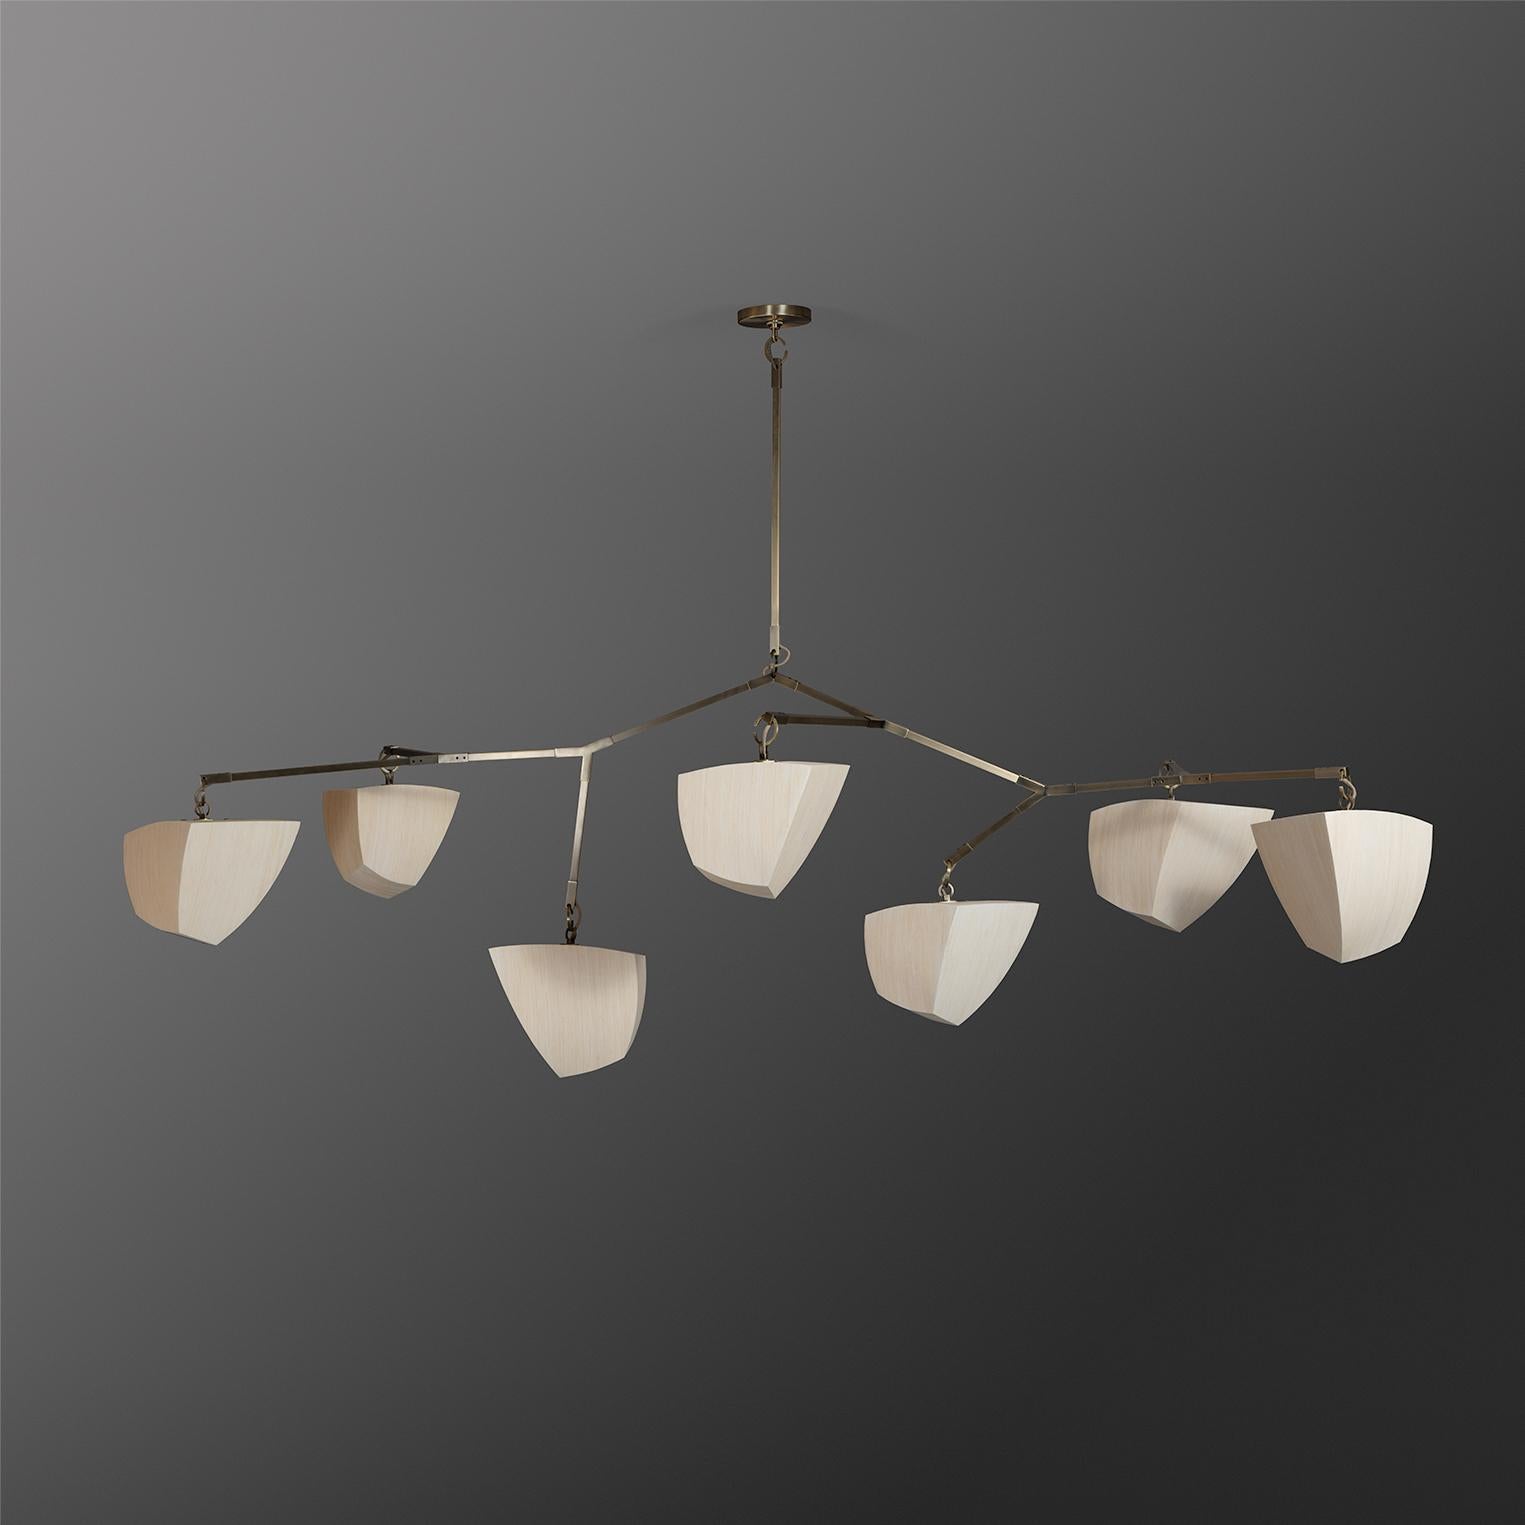 This is a horizontal mobile chandelier with 7 glowing handmade bamboo polyhedrons. 
Also available with porcelain polyhedrons.

The Cassiopeia series was designed for spaces with lower ceiling heights where a horizontal chandelier is